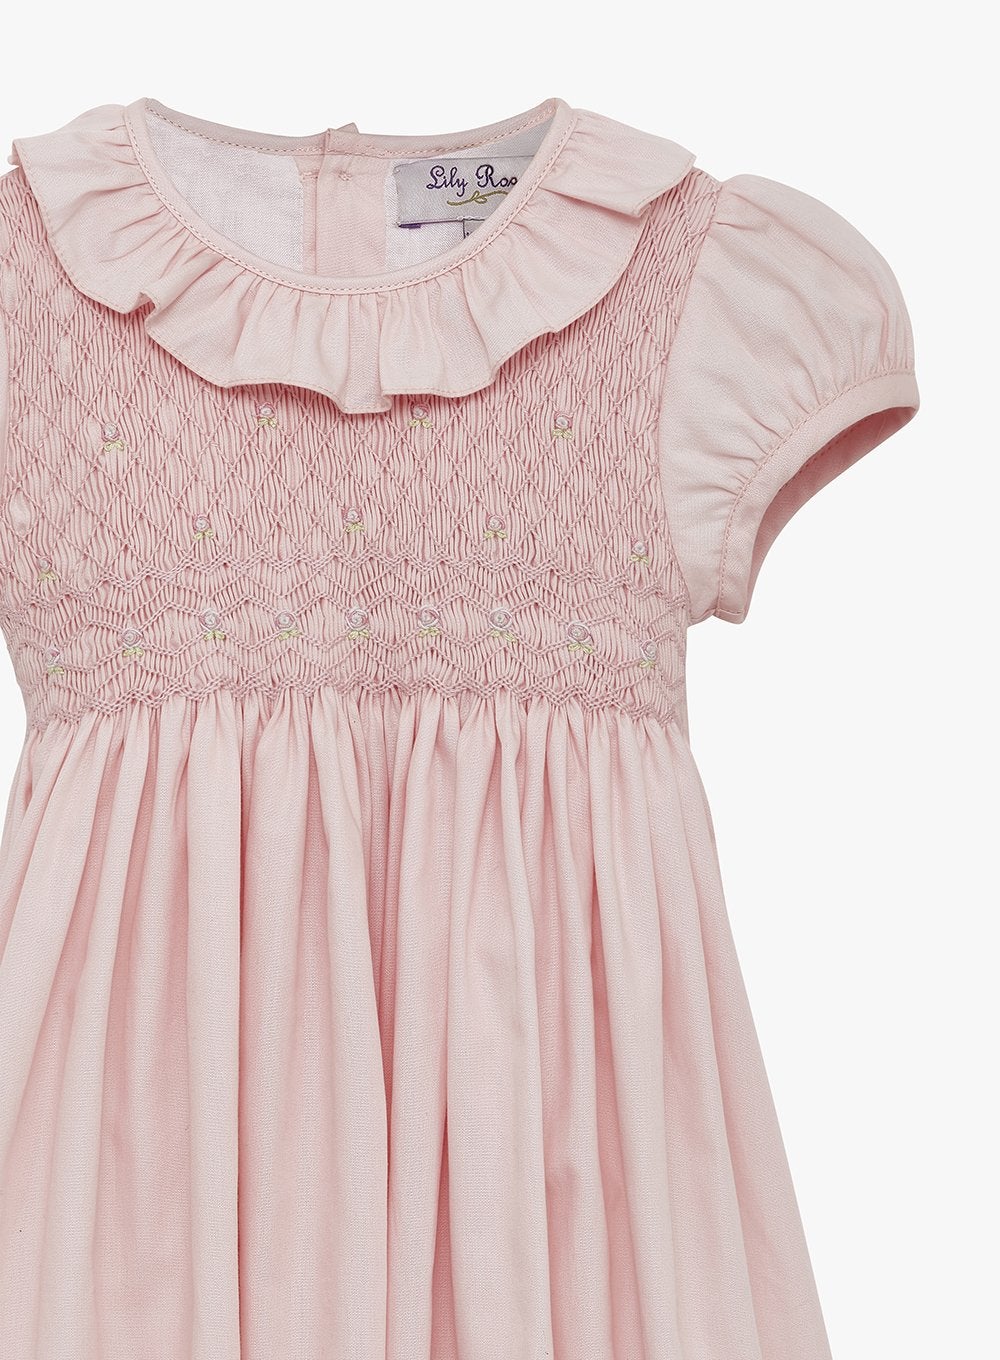 Baby Girls Hand Smocked Dress with Collar in Pink | Trotters – Trotters  Childrenswear USA